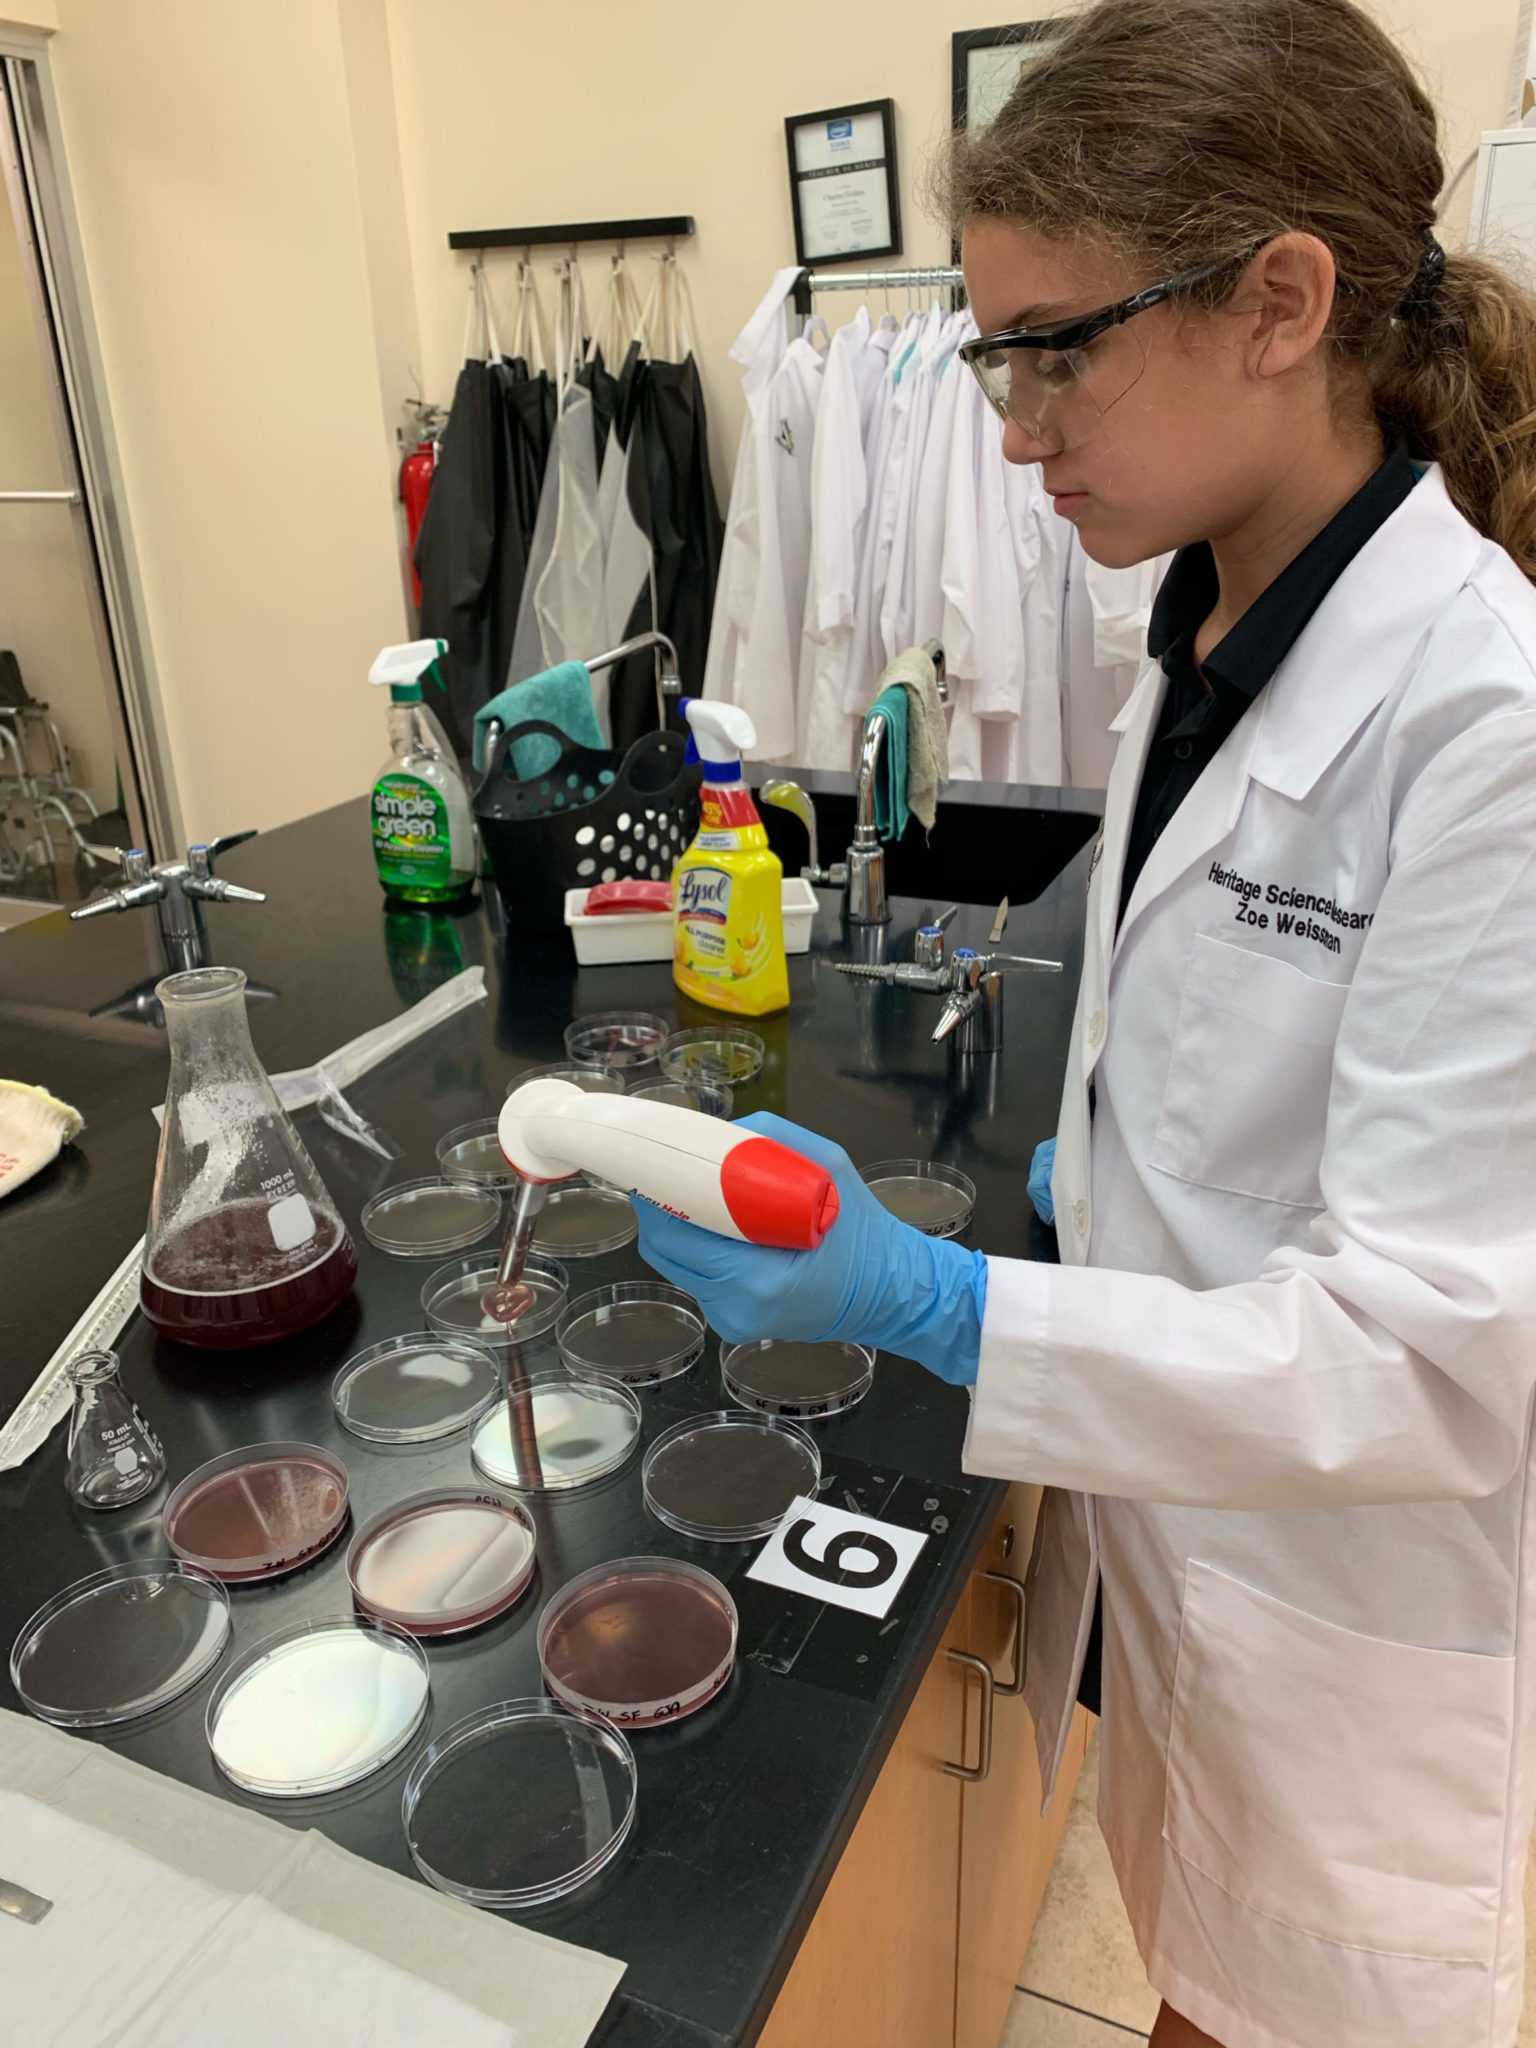 Zoe Weissman at work during her research experiment